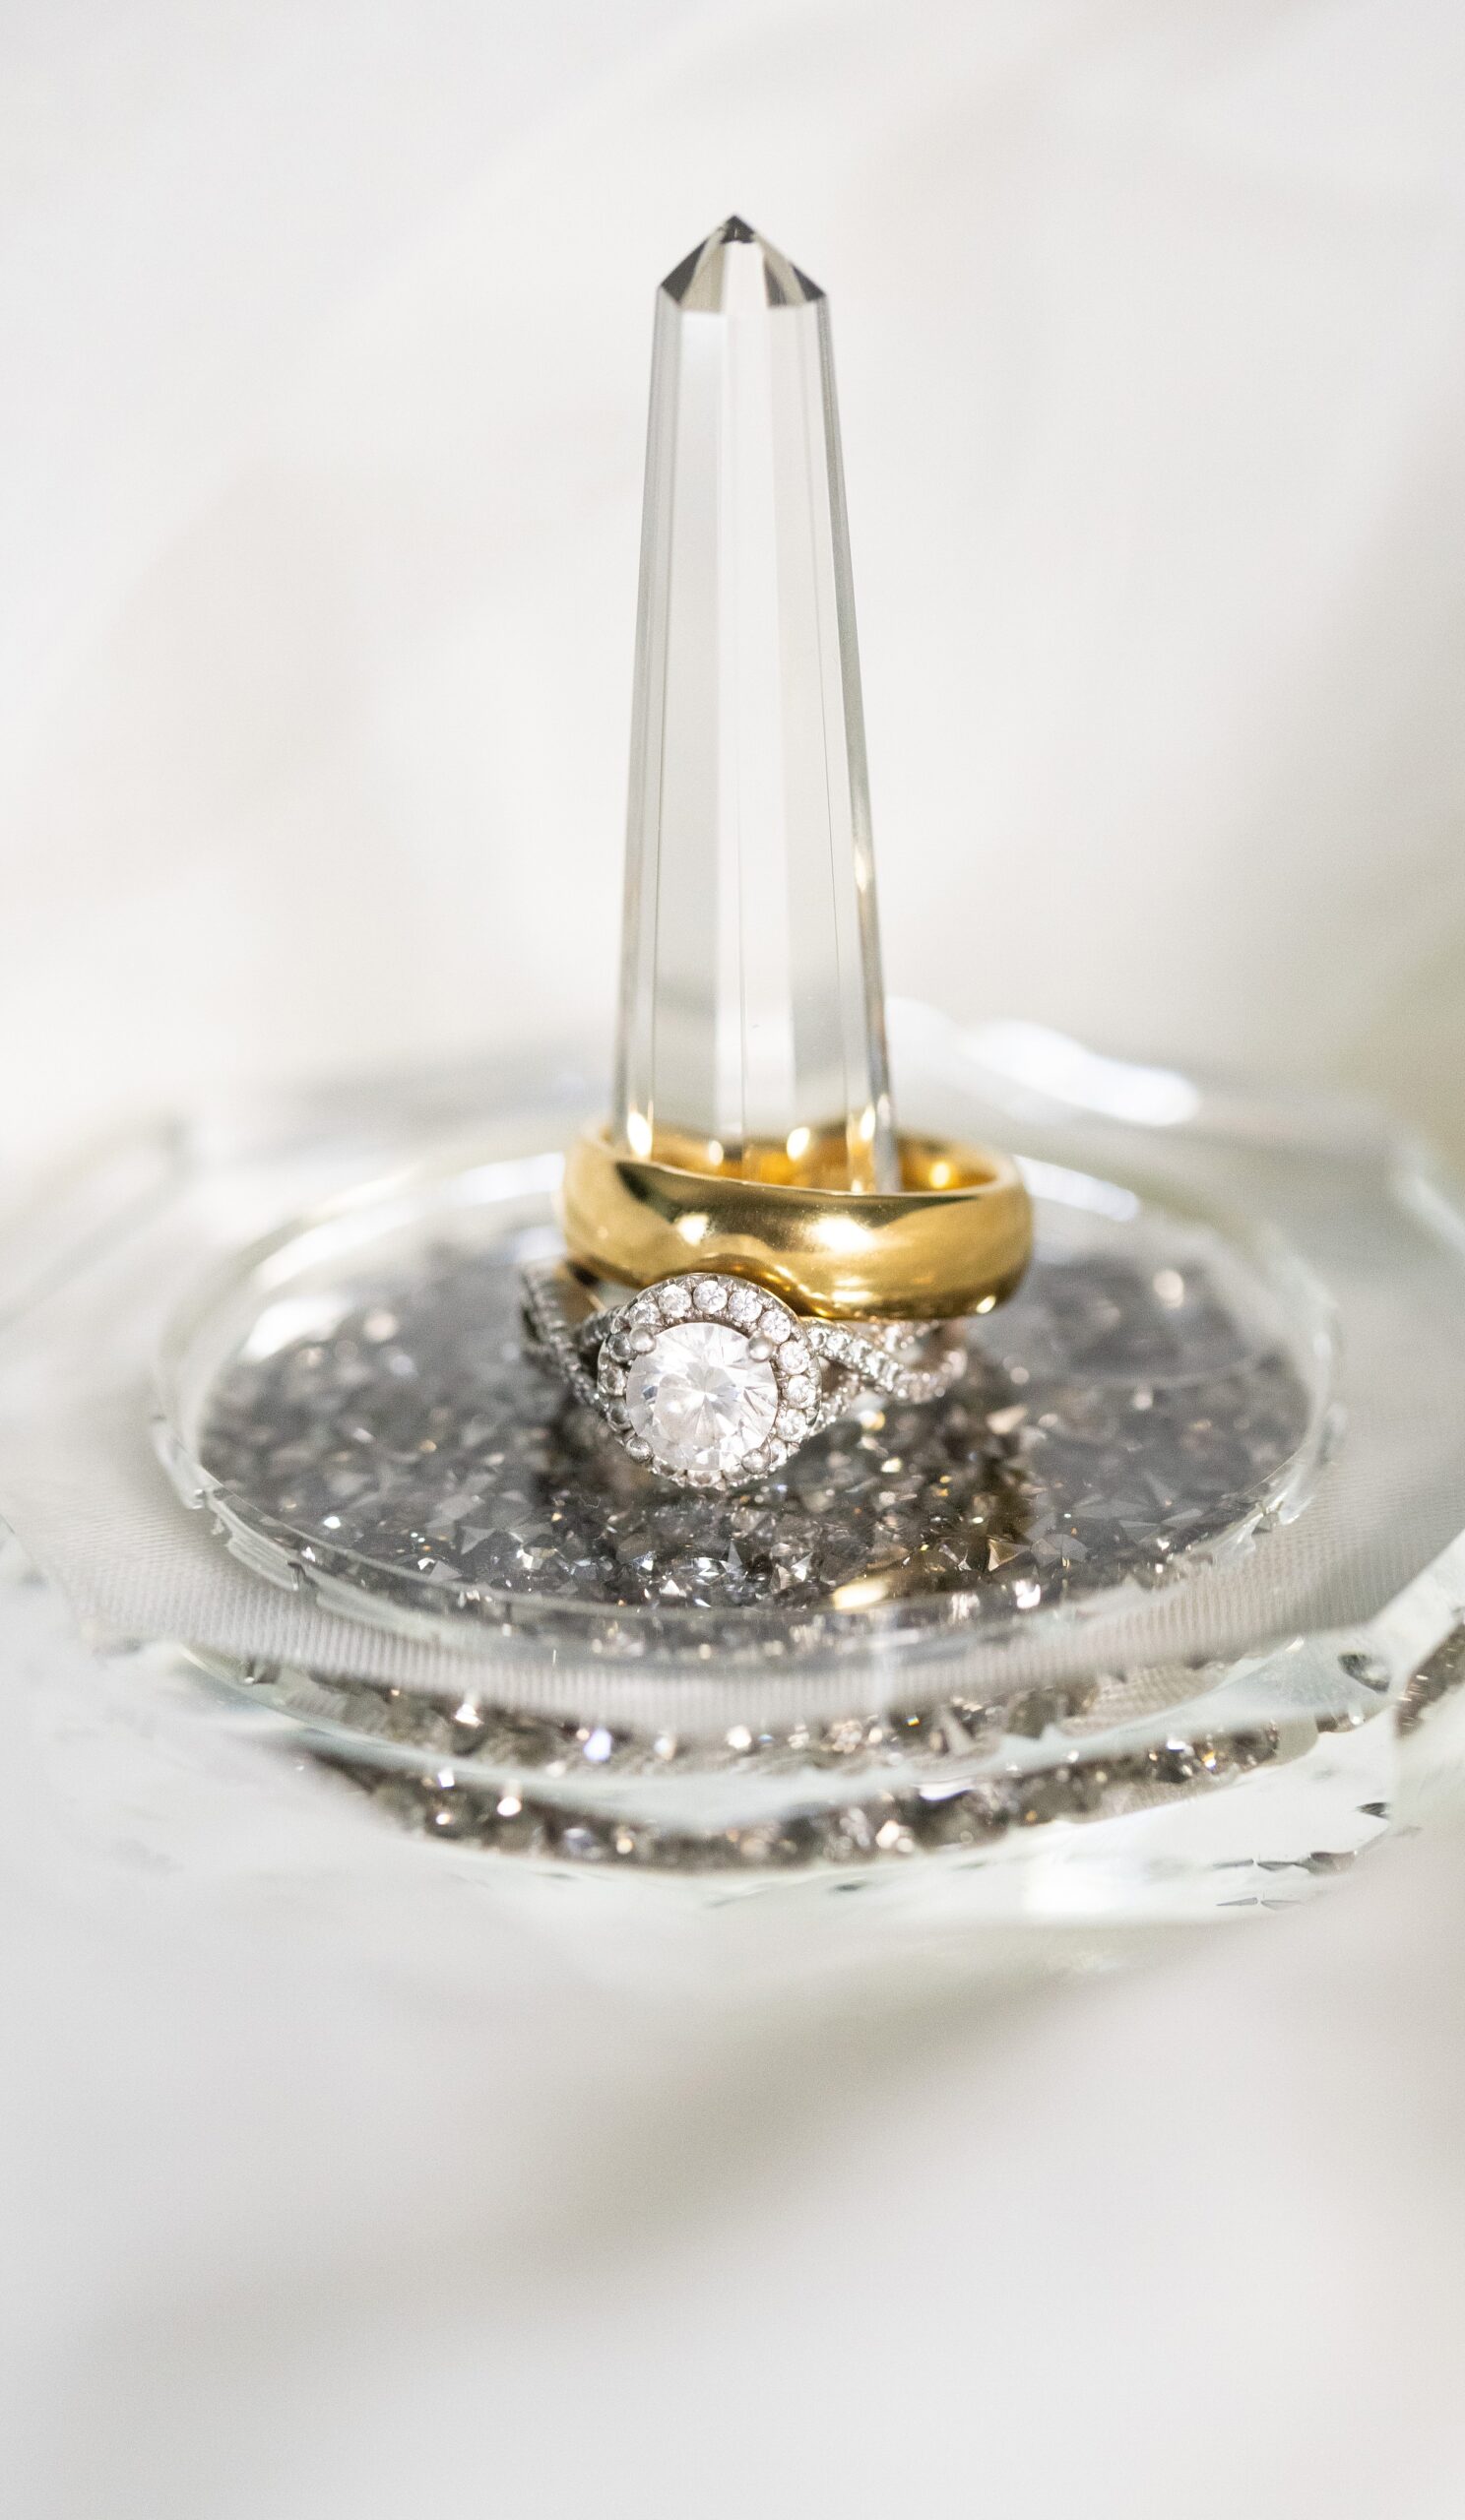 Details of wedding rings sitting on a glass pedestal